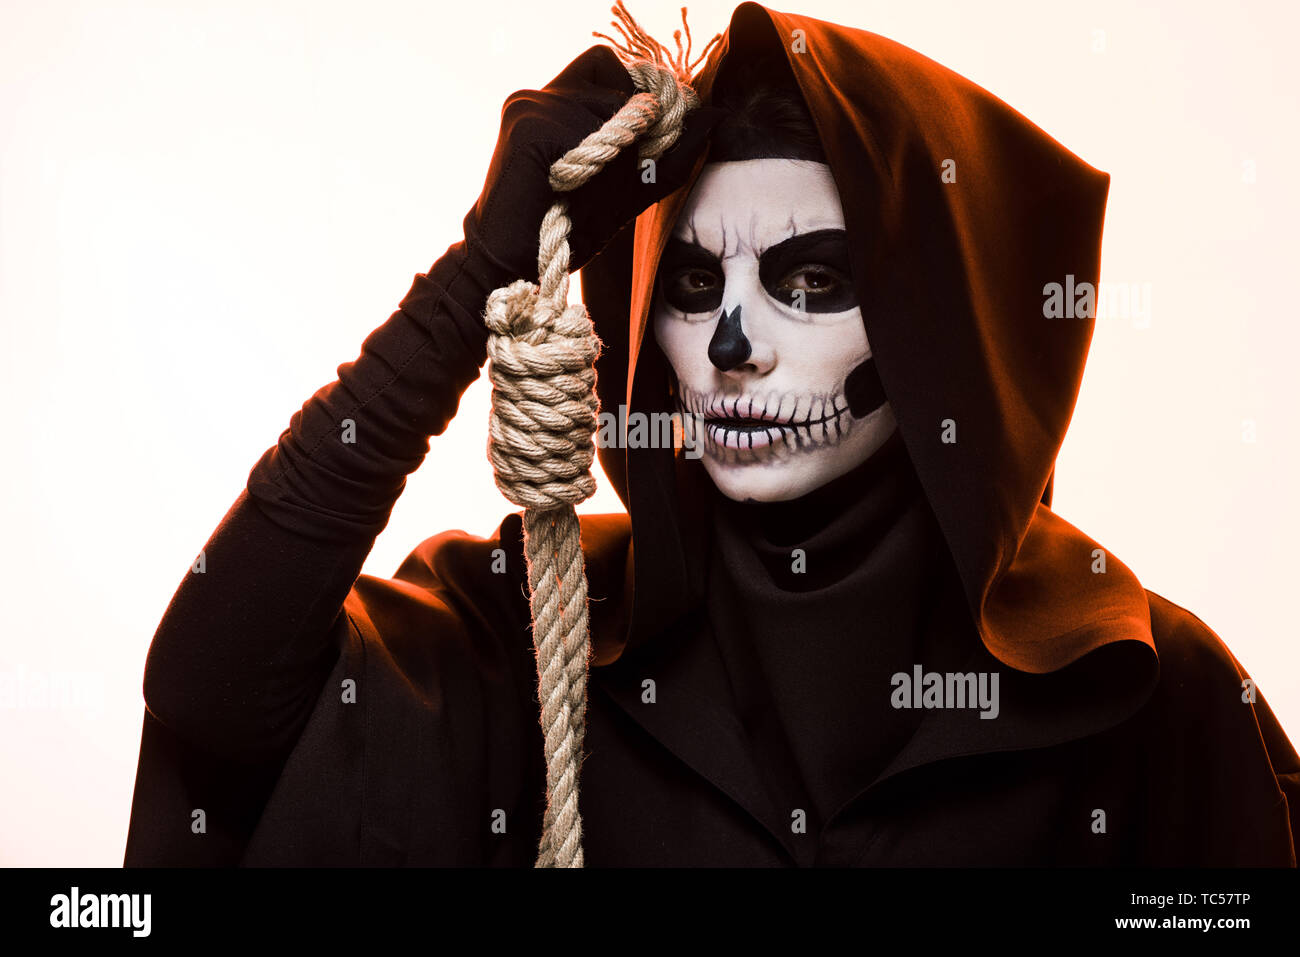 woman in death costume holding hanging noose isolated on white Stock Photo